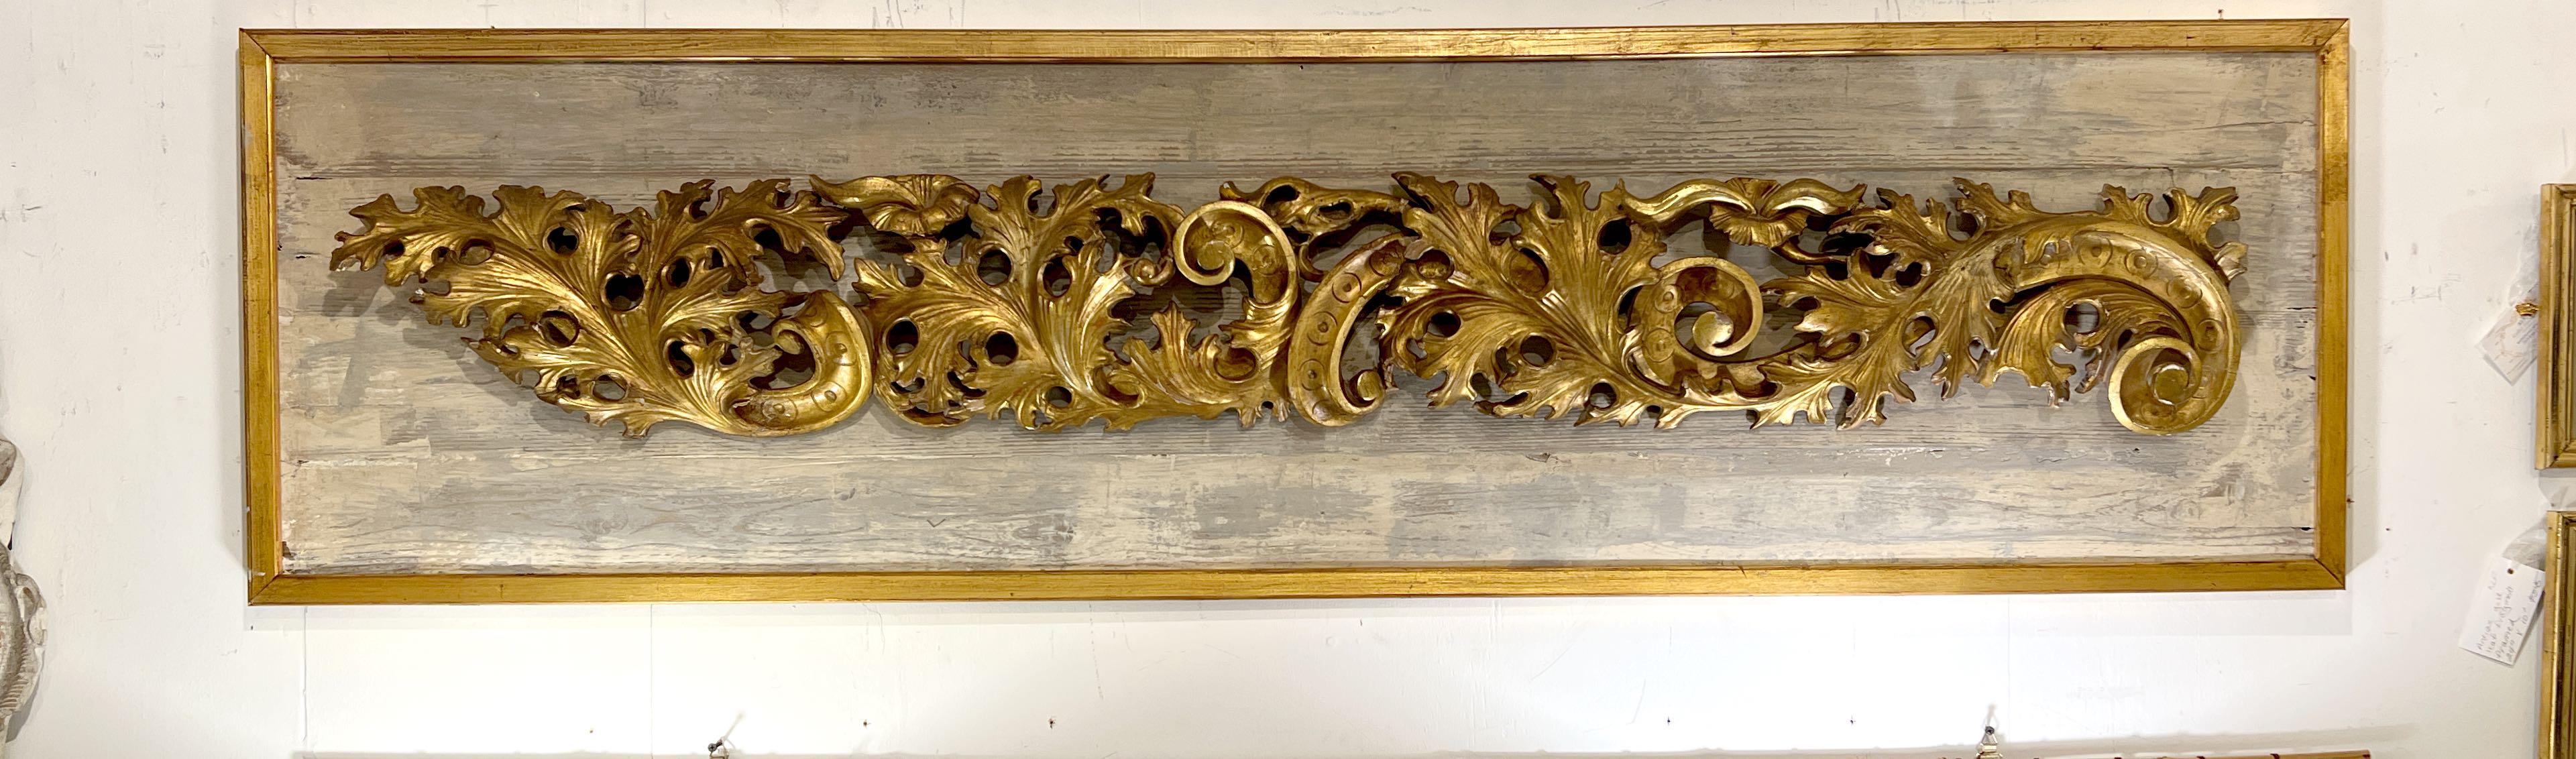 Wood Antique Architectural Fragment  circa 1800 Gilded and Framed  